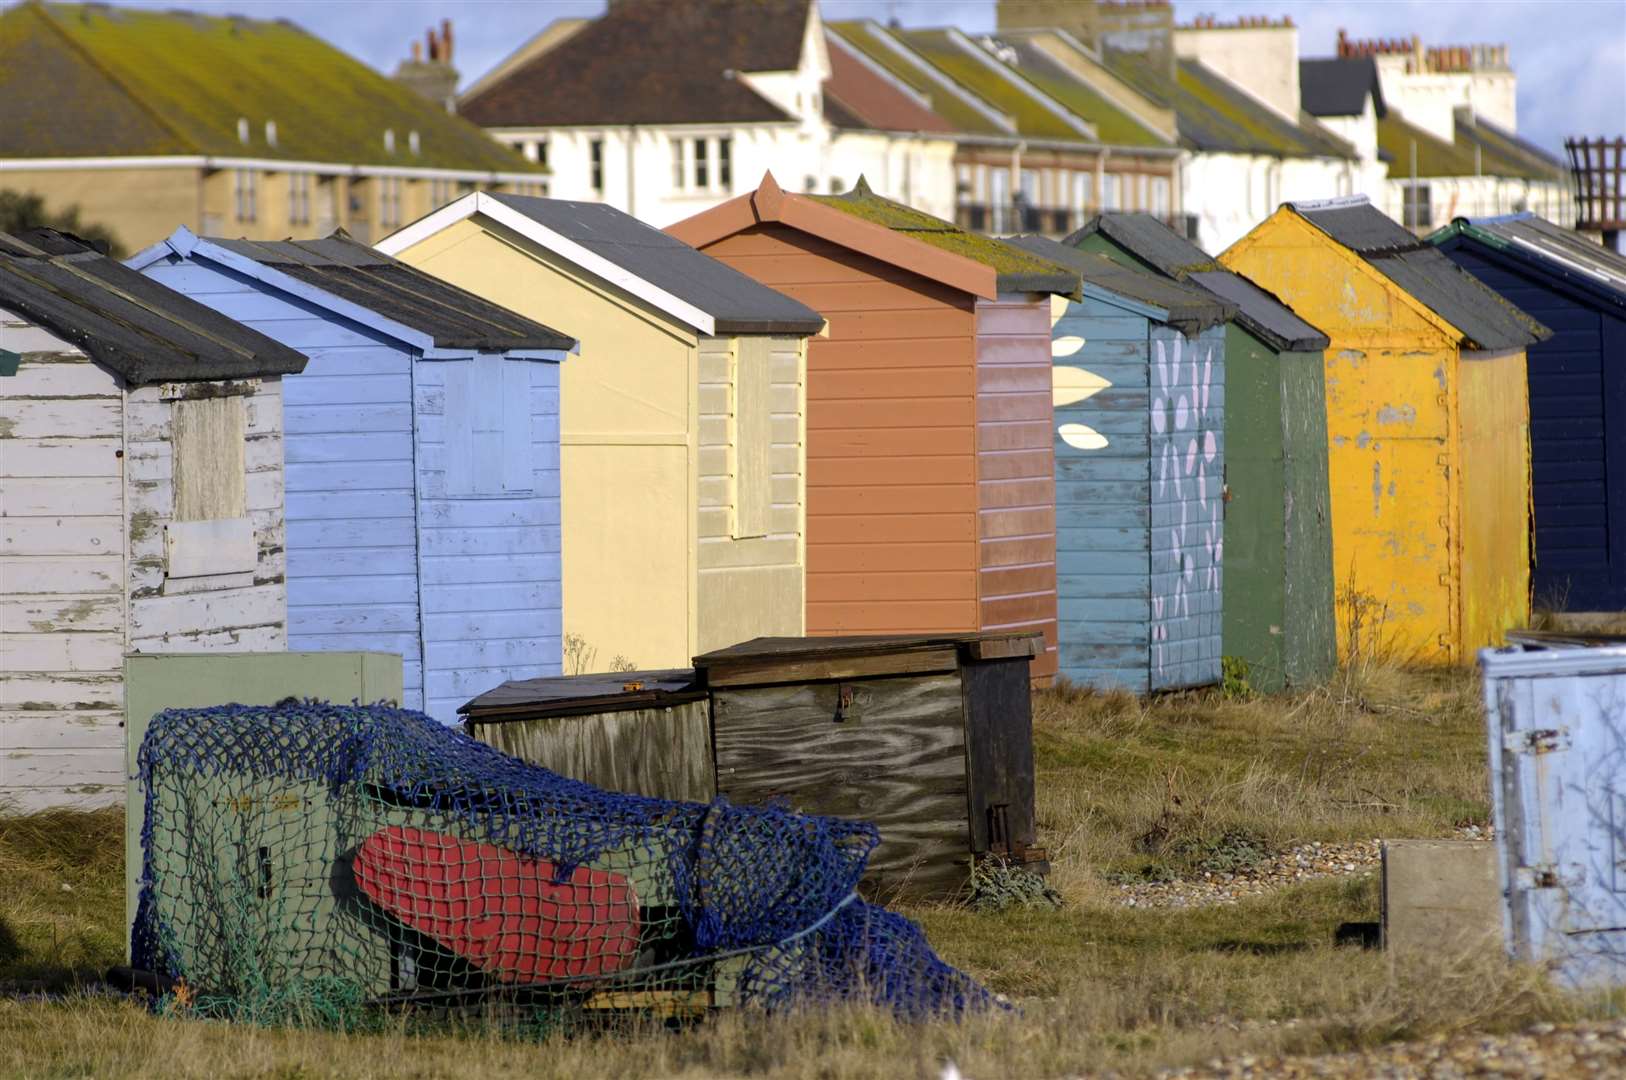 Police have issued a warning to beach hut owners after the vandalism in Coast Drive, Greatstone